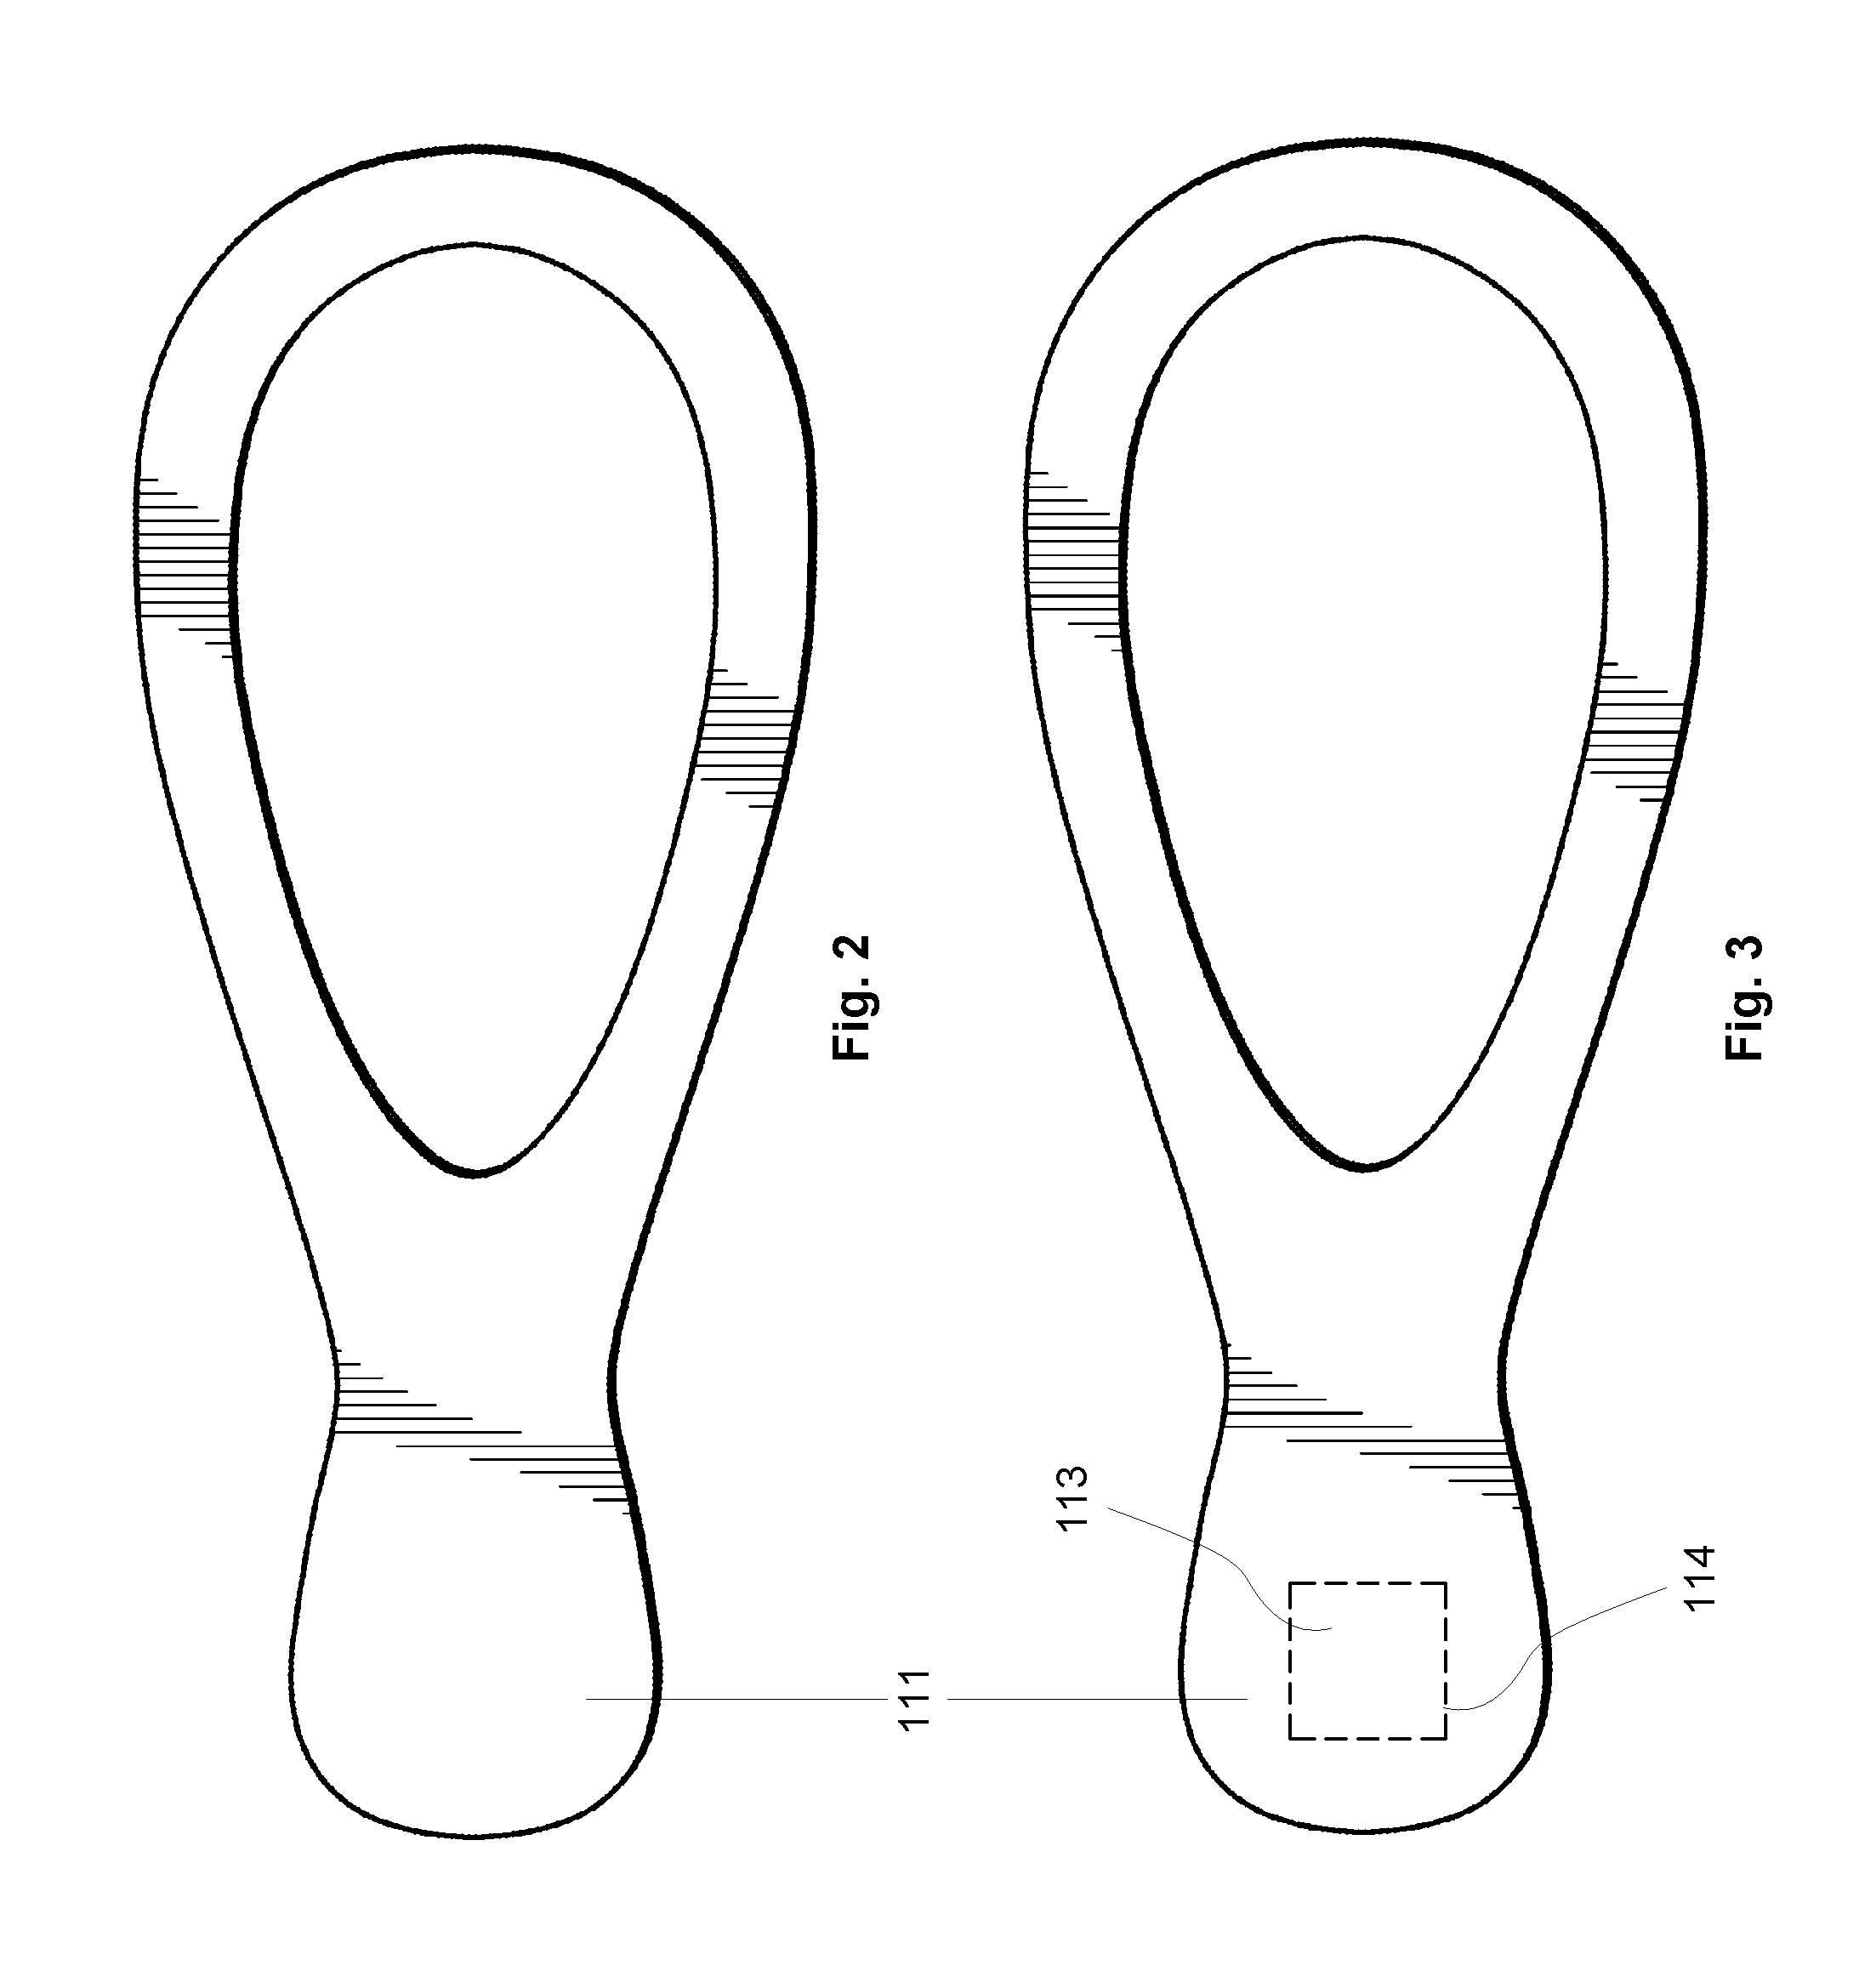 Systems and methods for holding an instrument pick